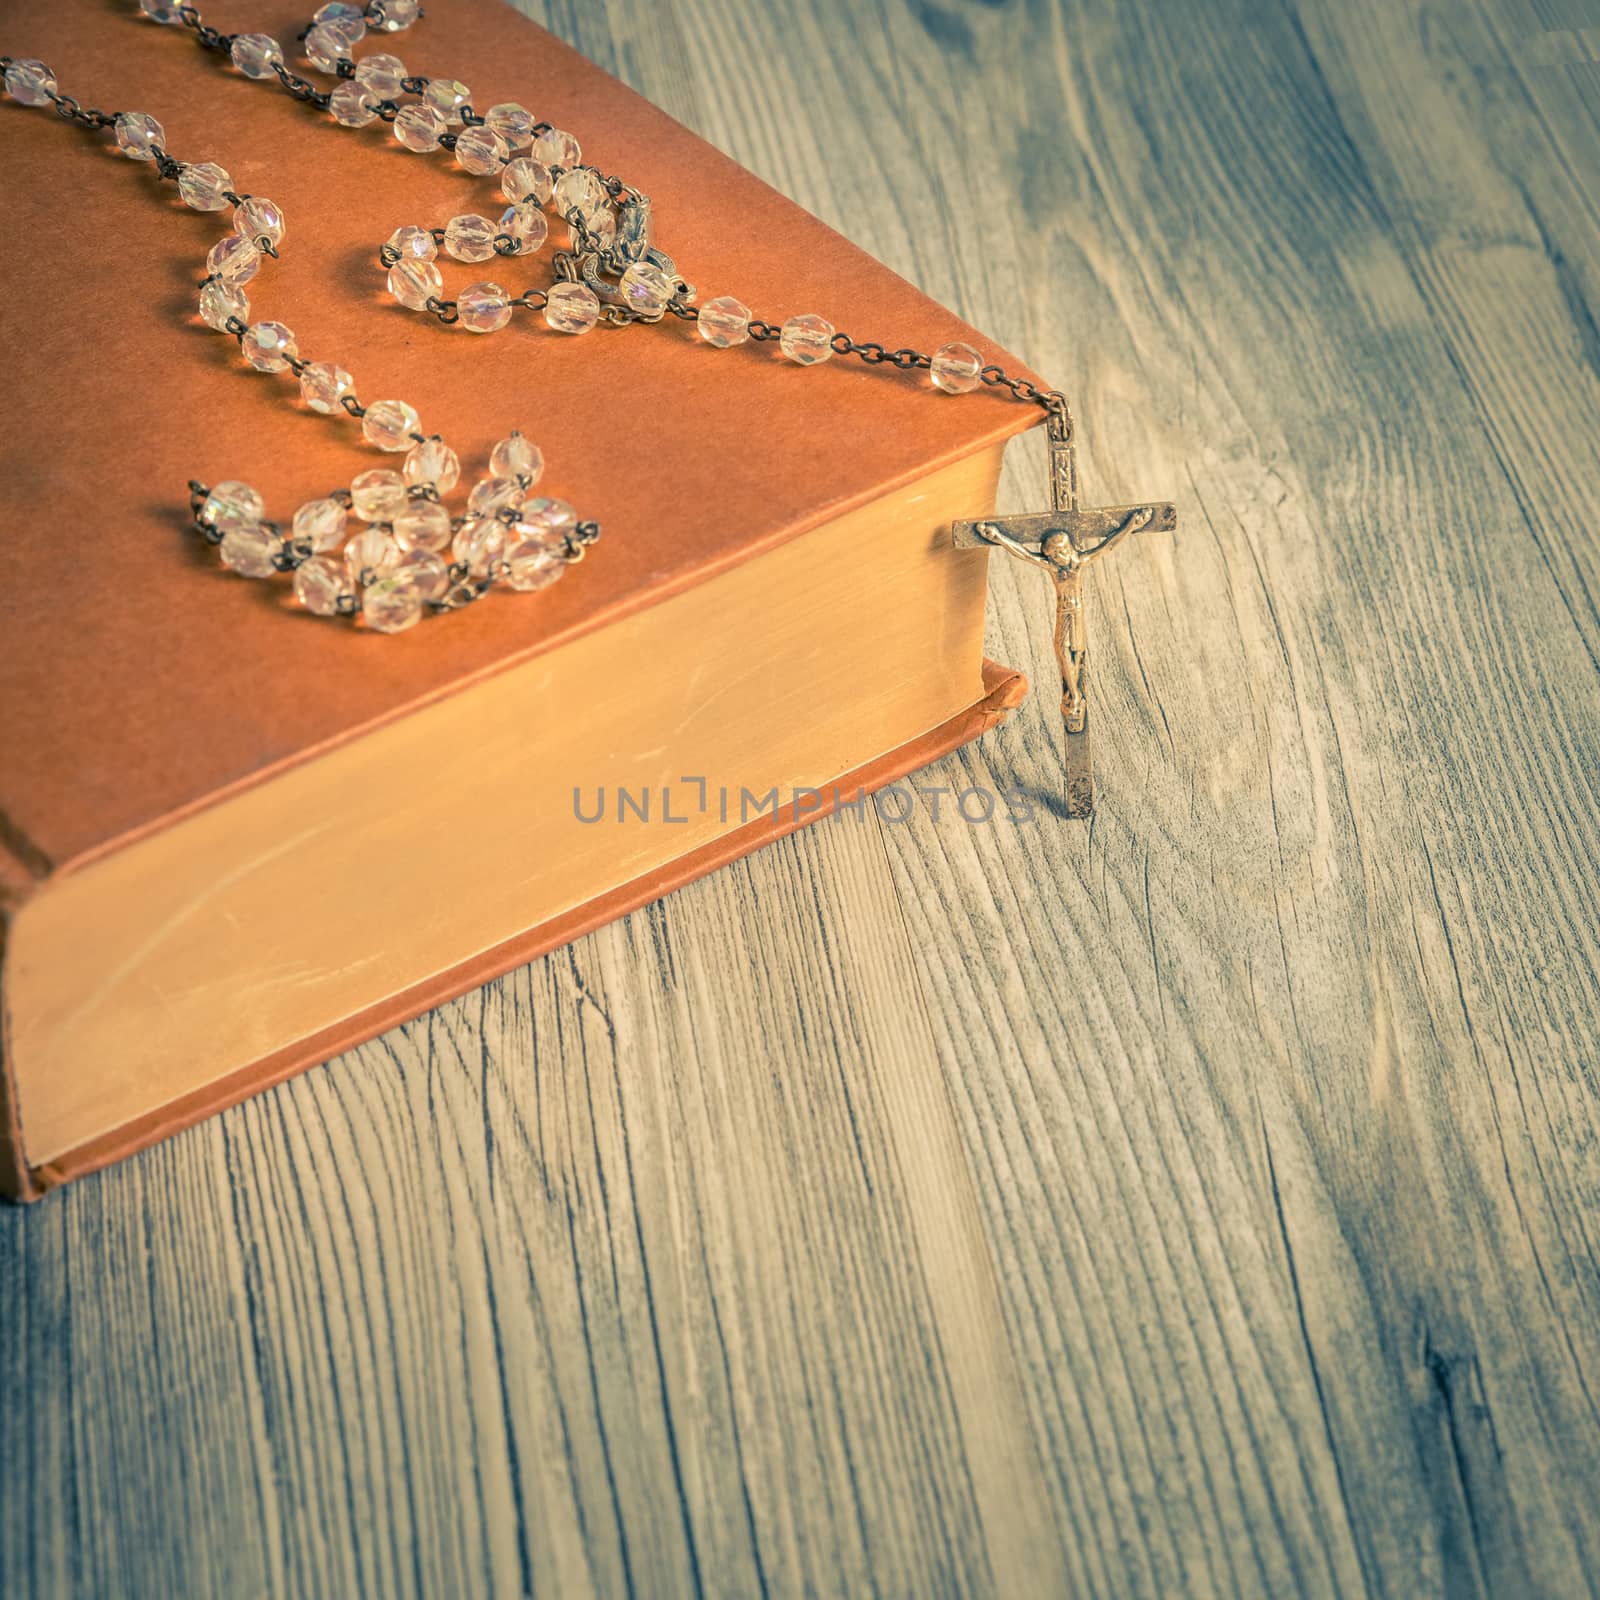 vintage rosary beads on old books, square photo.